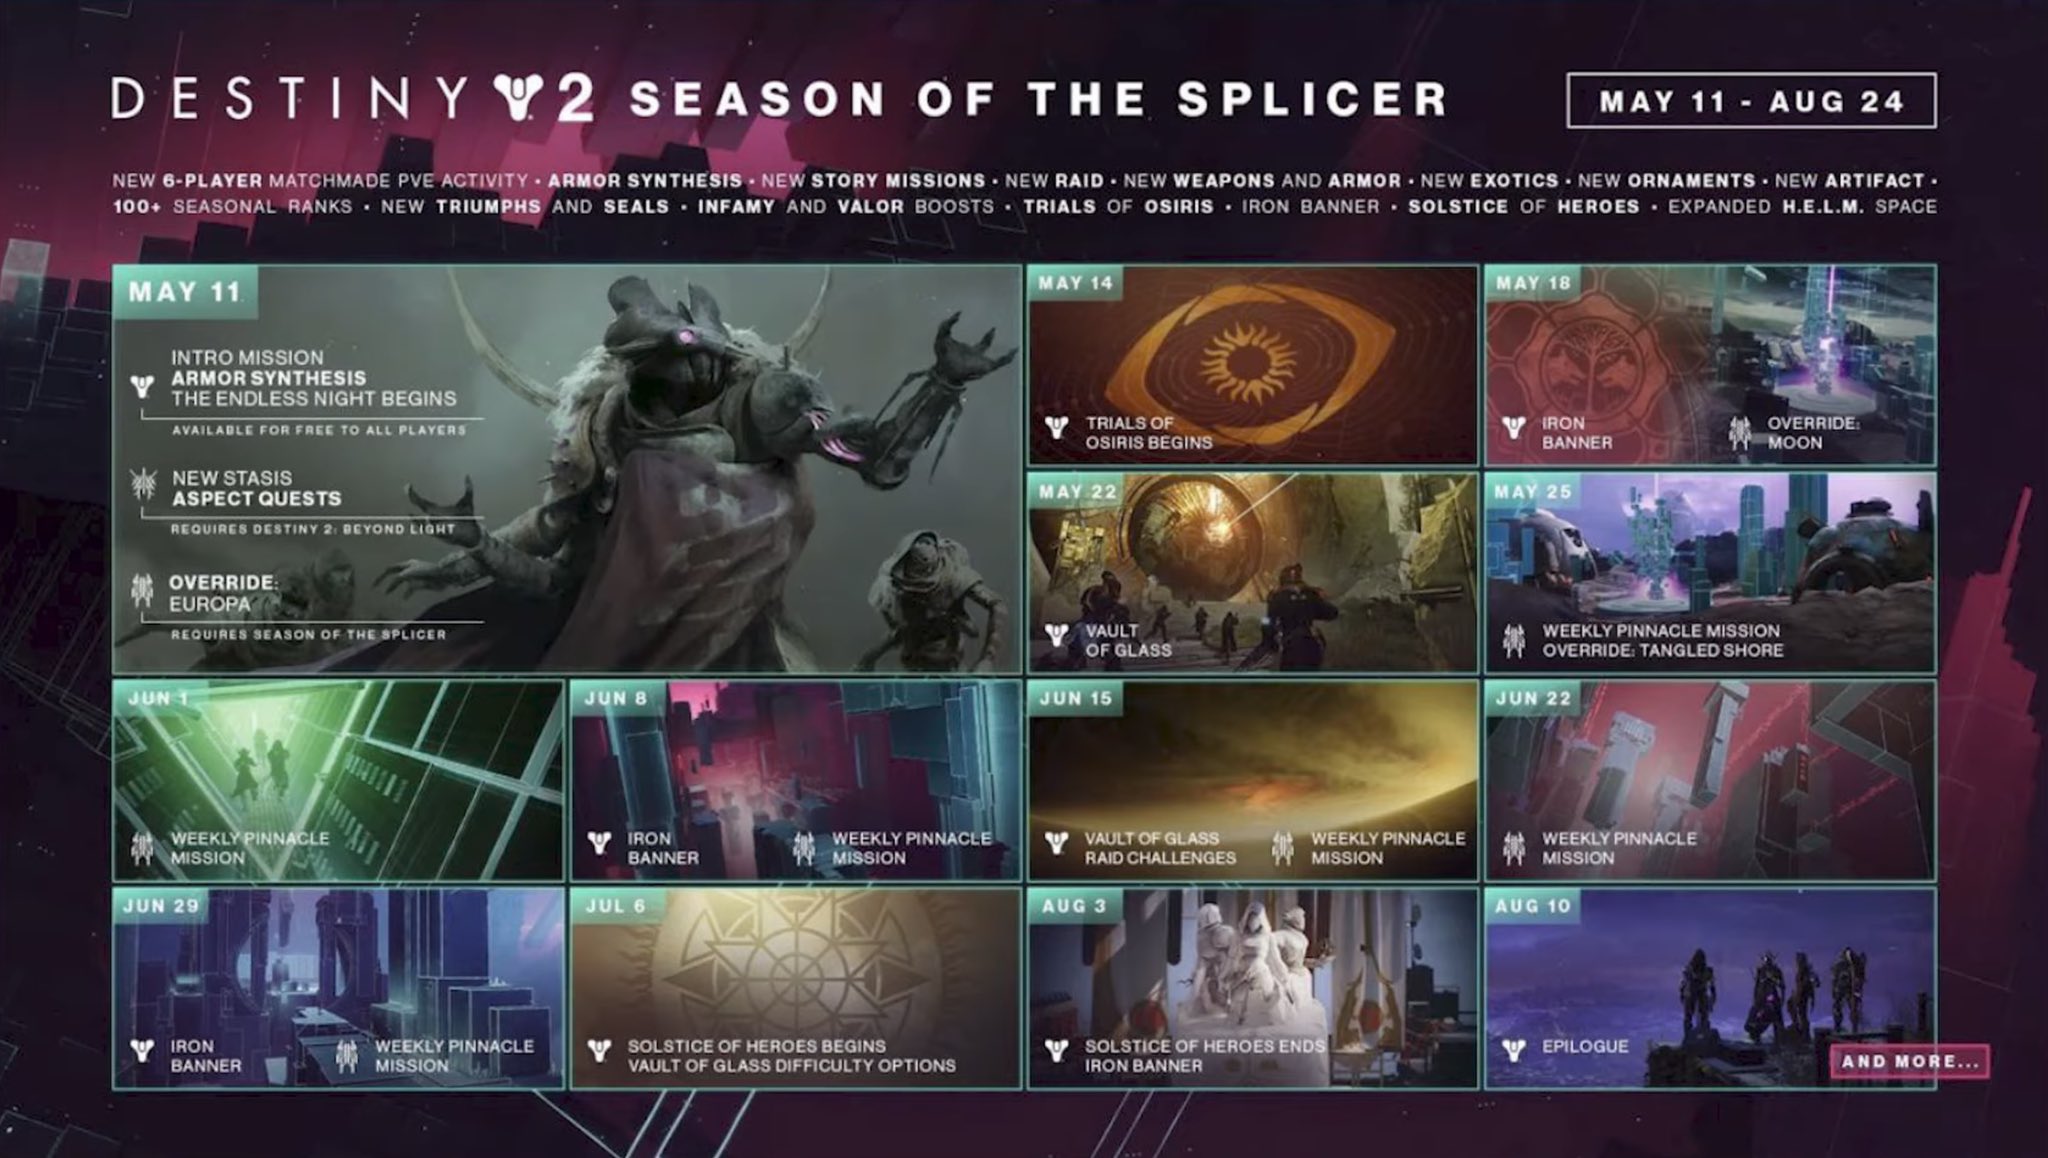 Here's the full road map of content for Destiny 2's Season of the